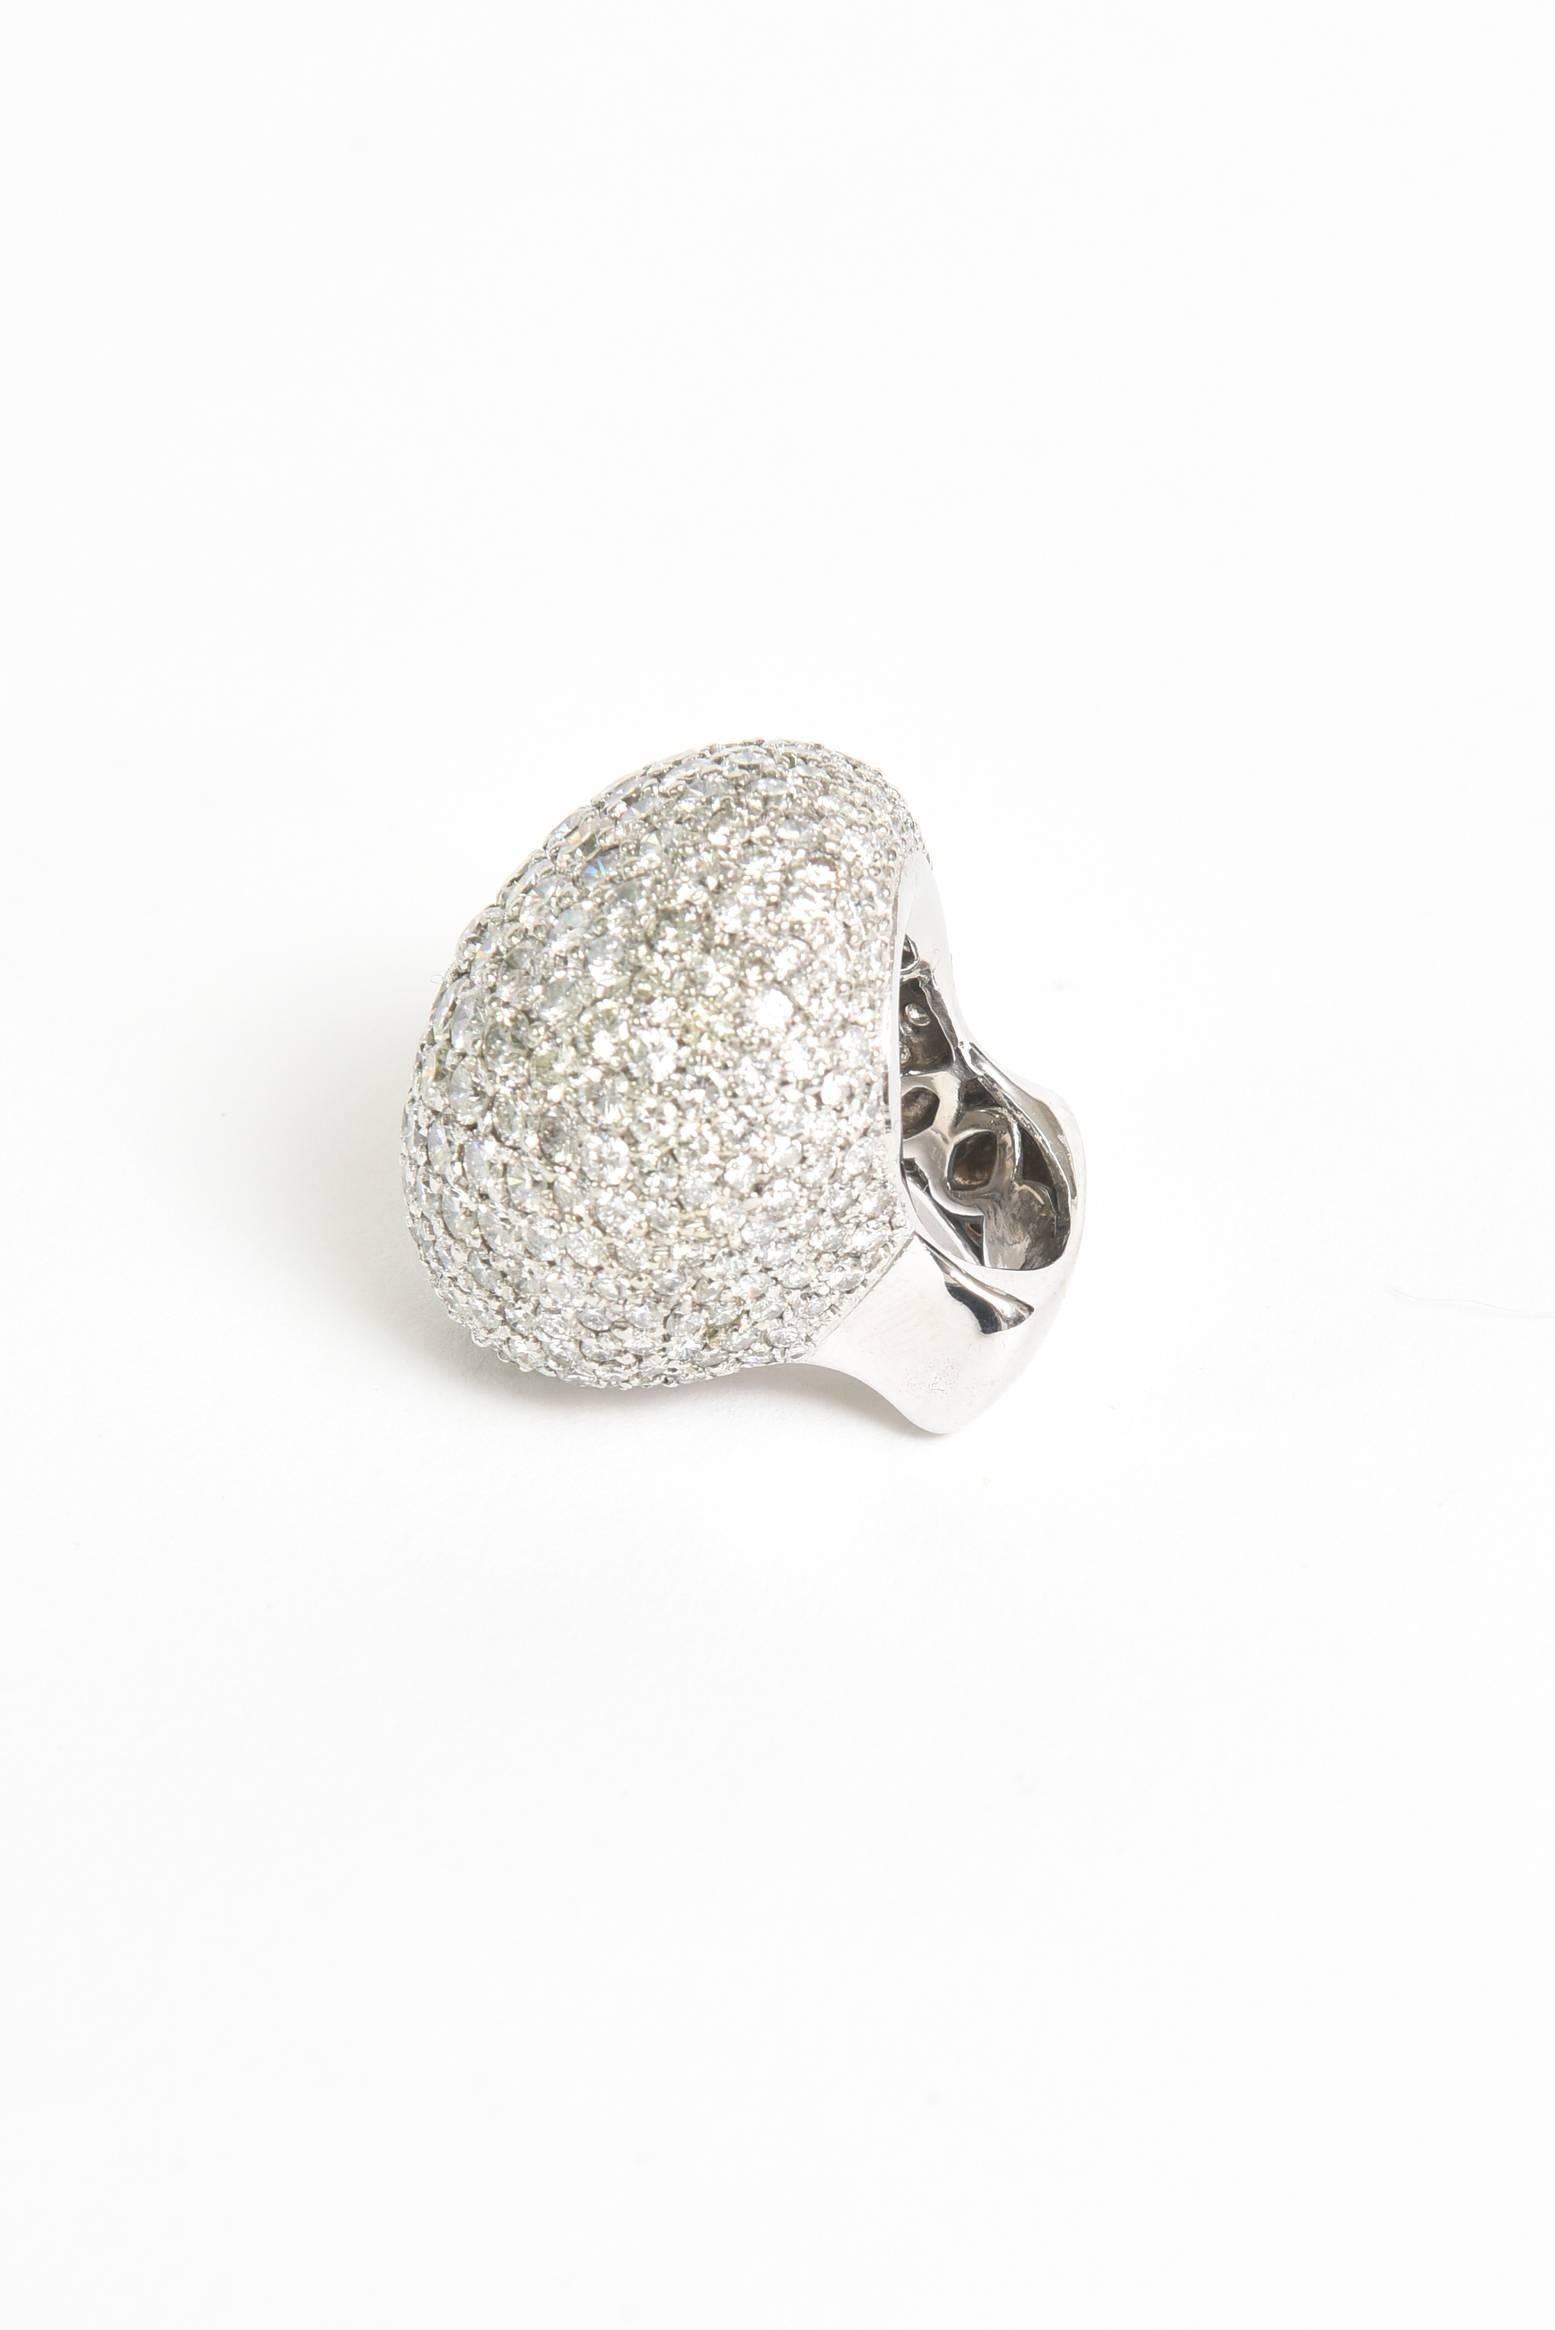 Modern Custom Large 18 Karat White Gold and 24 Carat Diamond Dome or Cocktail Ring For Sale